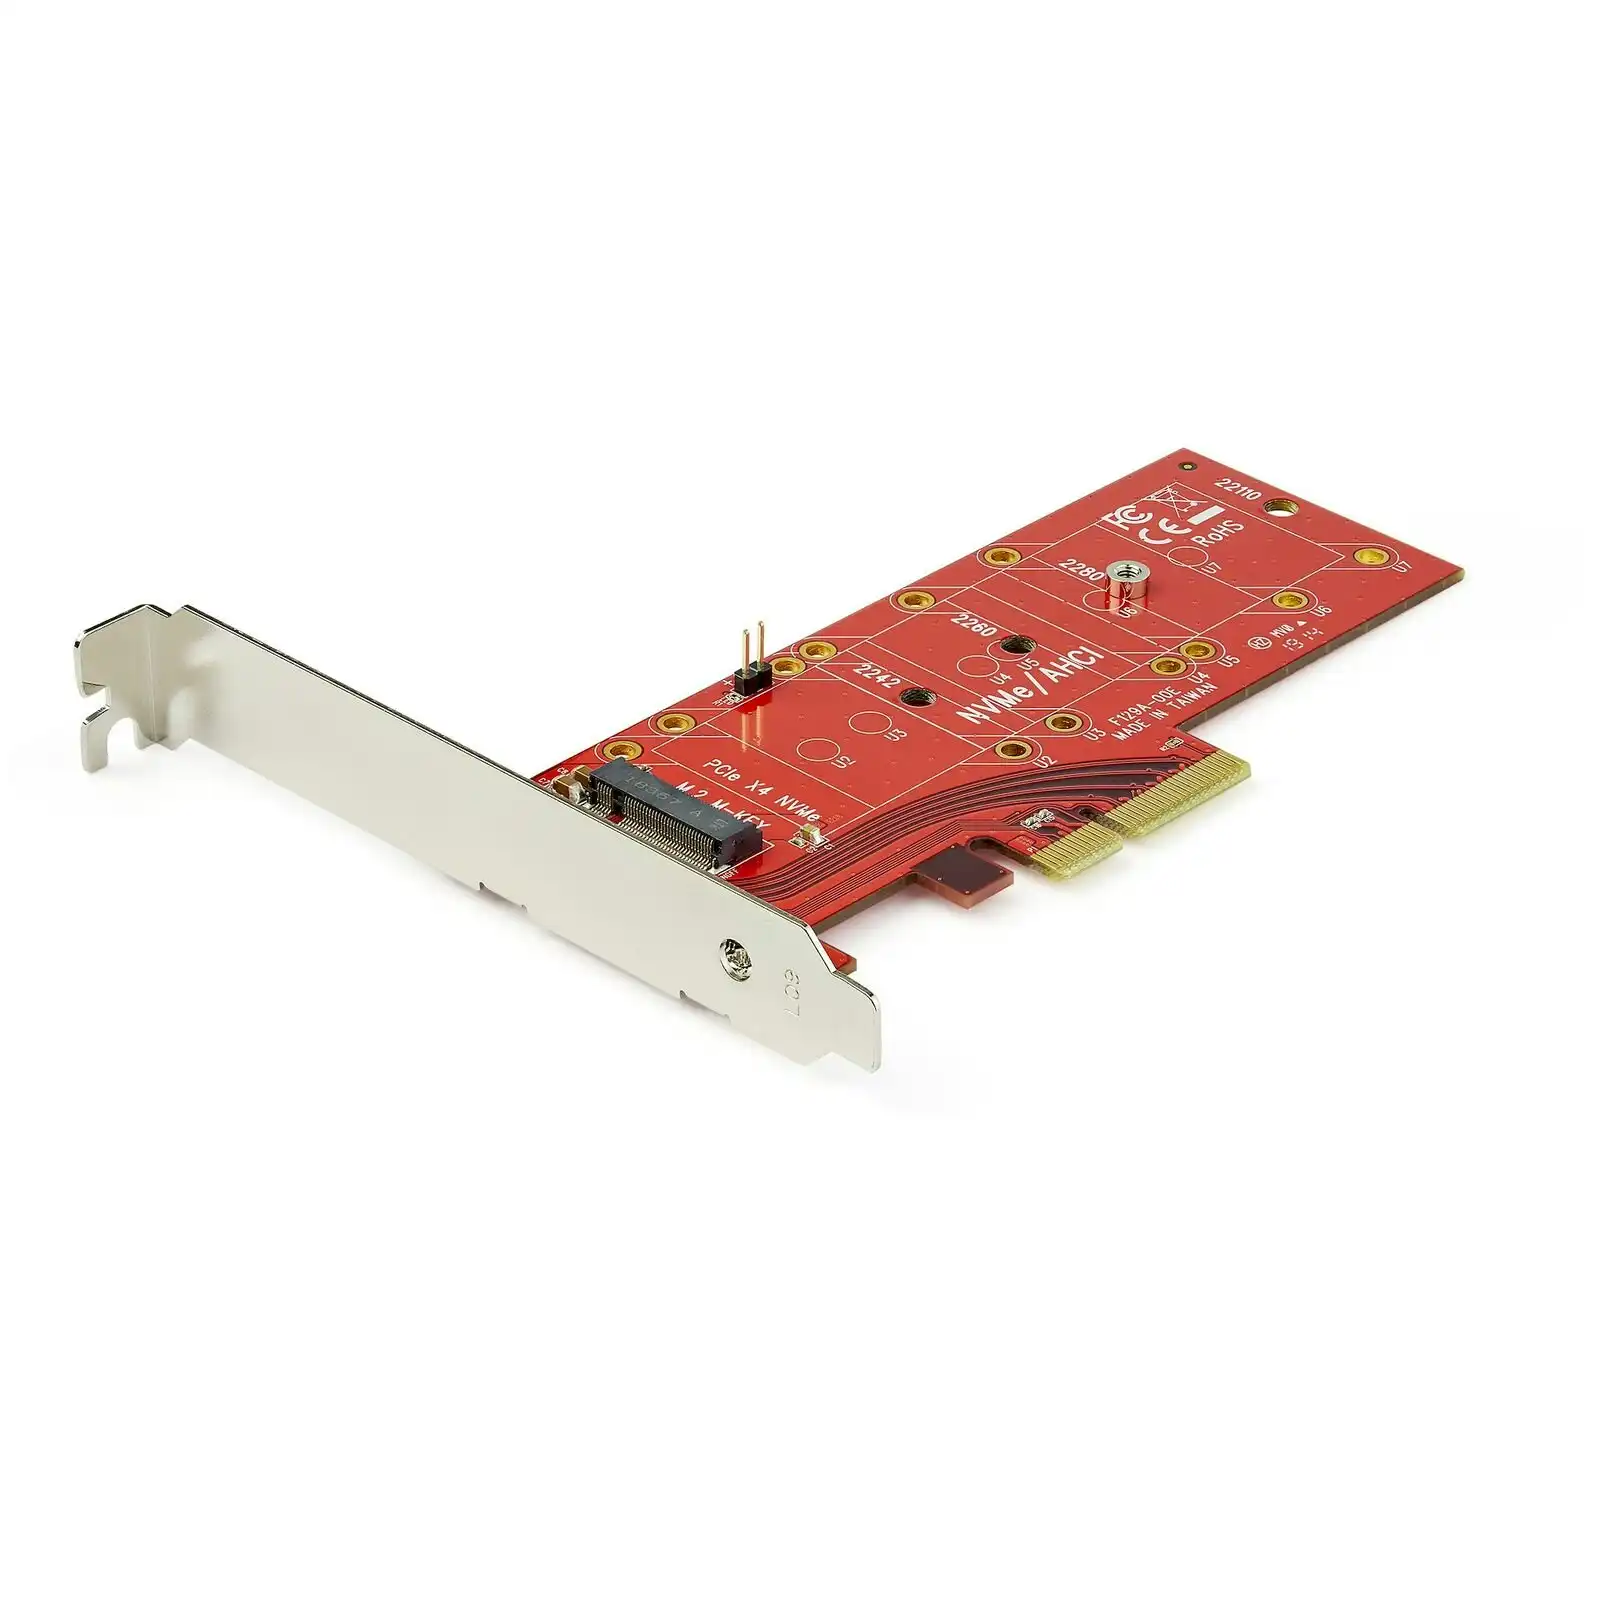 Star Tech Ultra Fast x4 PCIe 3.0 to M.2 PCIe SSD Adapter for M.2 NVMe/AHCI/SSD